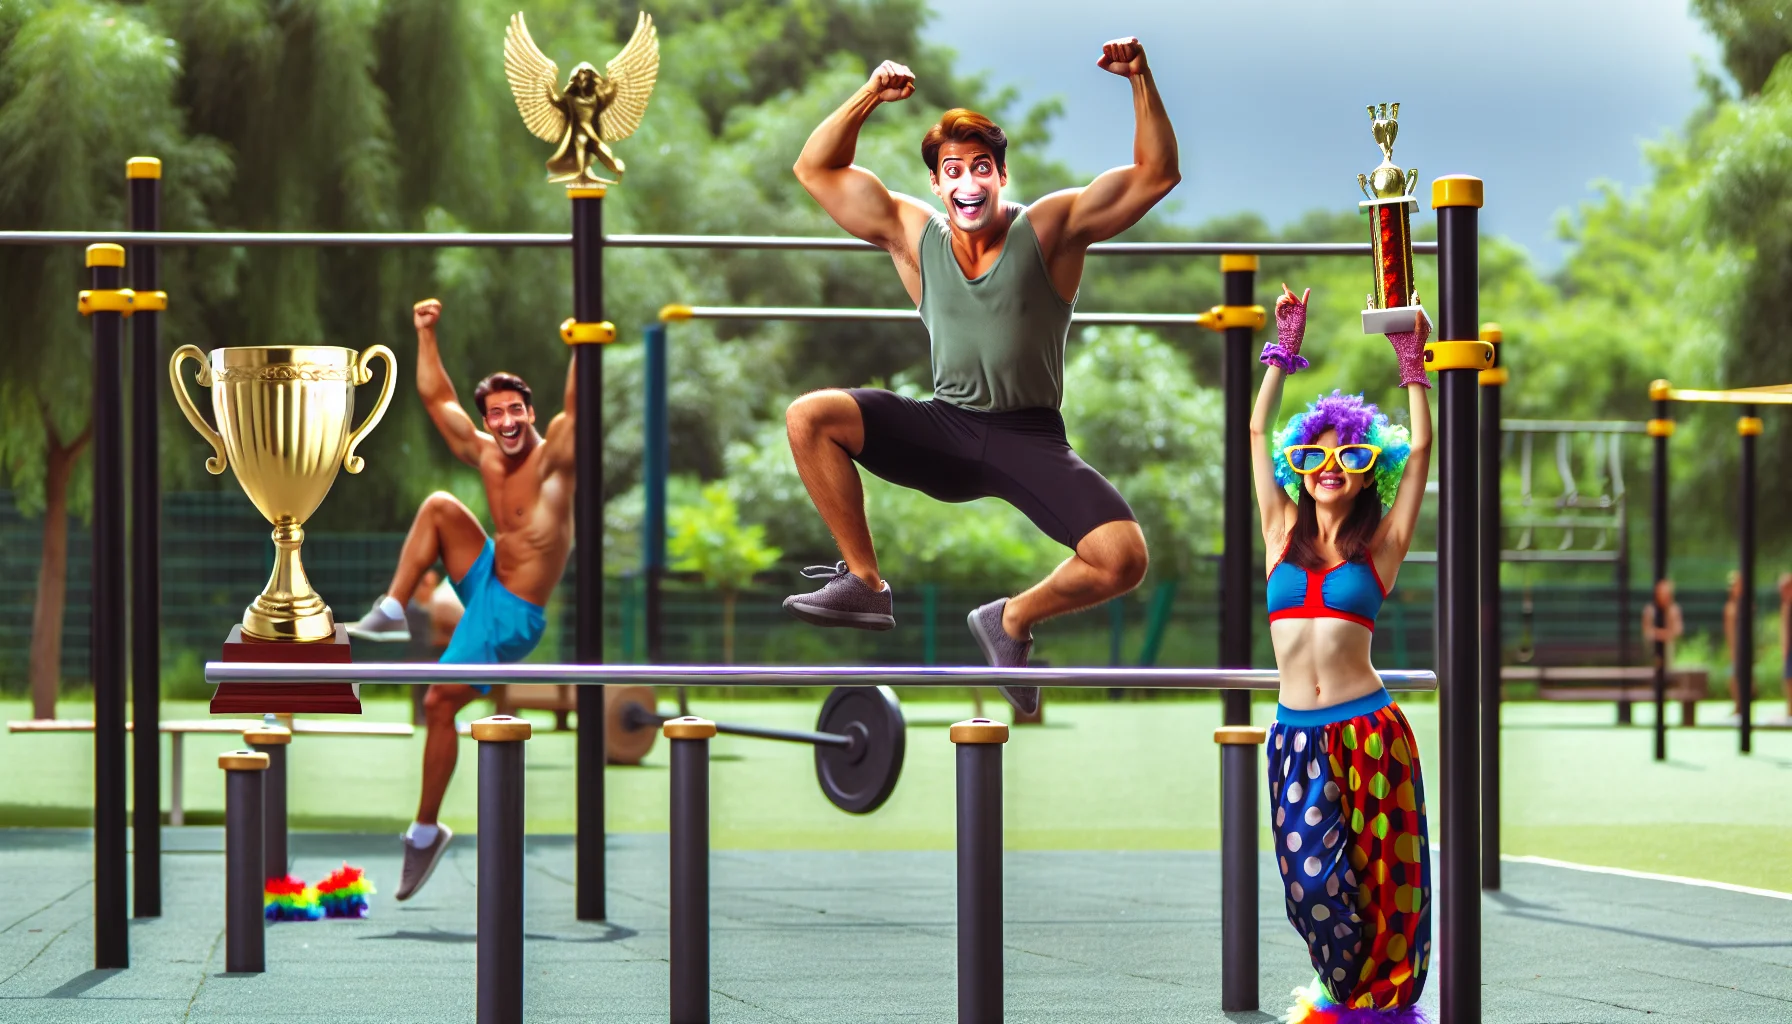 Imagine a humorous fitness scenario taking place in a well-equipped calisthenics park. Our main character is an Hispanic male, highly athletic, caught mid-jump on the balance beam with an expression of joyful surprise. A South Asian woman, fit and determined, is intently focusing on her pull-up routine. However, to add a twist of fun, various unlikely props like feather boas, clown shoes and oversized sunglasses have found their way into the scene. A person-sized trophy costume is seen cheering them on, injecting motivation and hilarity into this ending ranks and invigorating exercise setting.